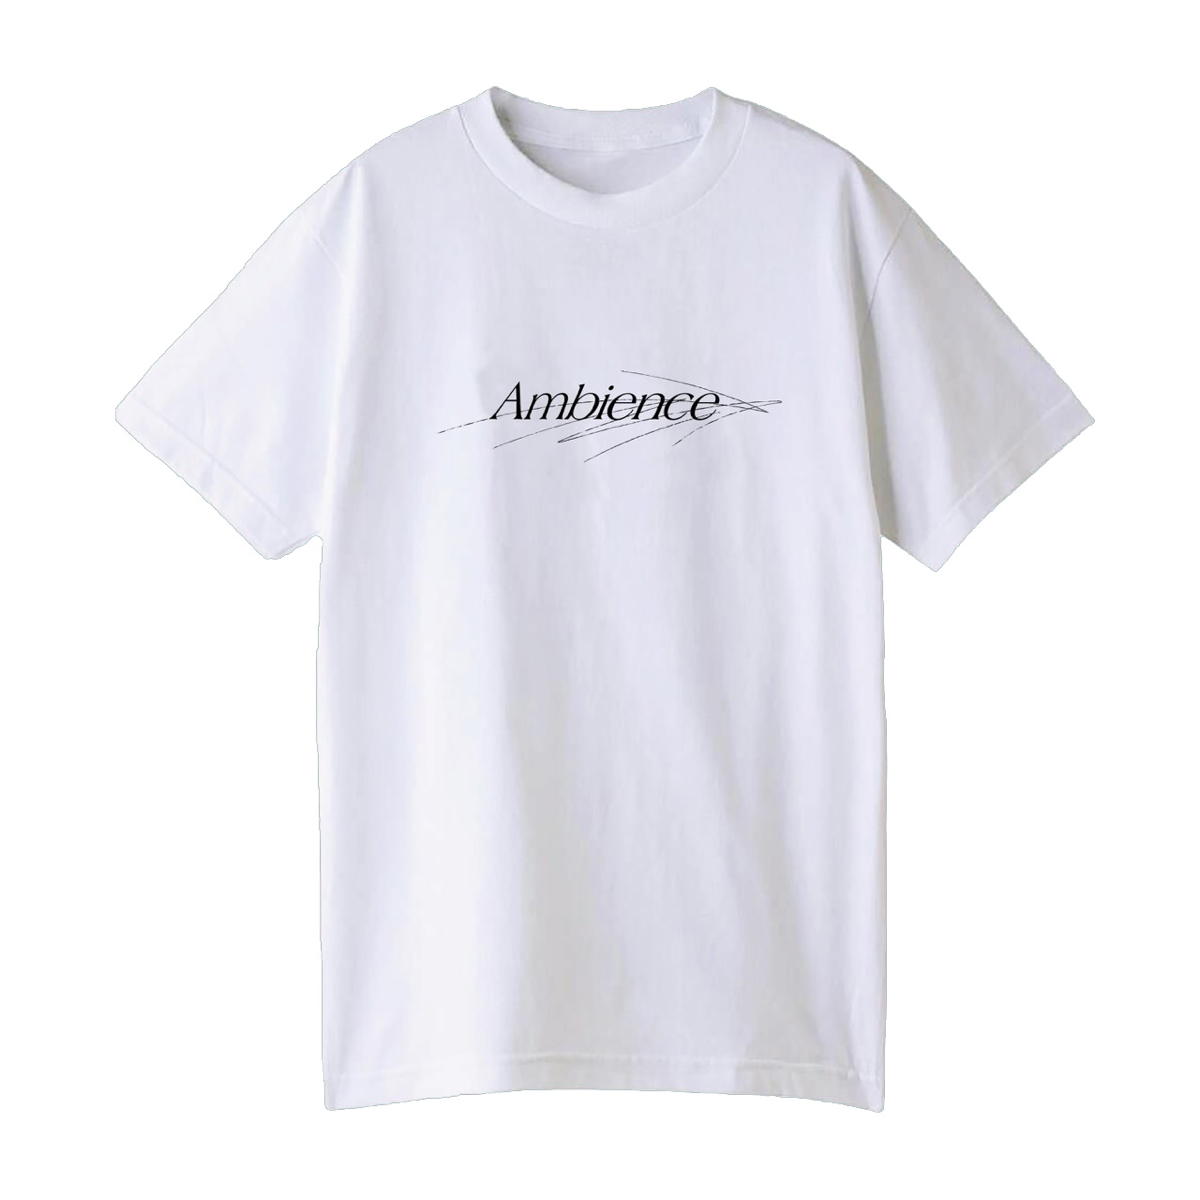 Ambience・Tシャツ